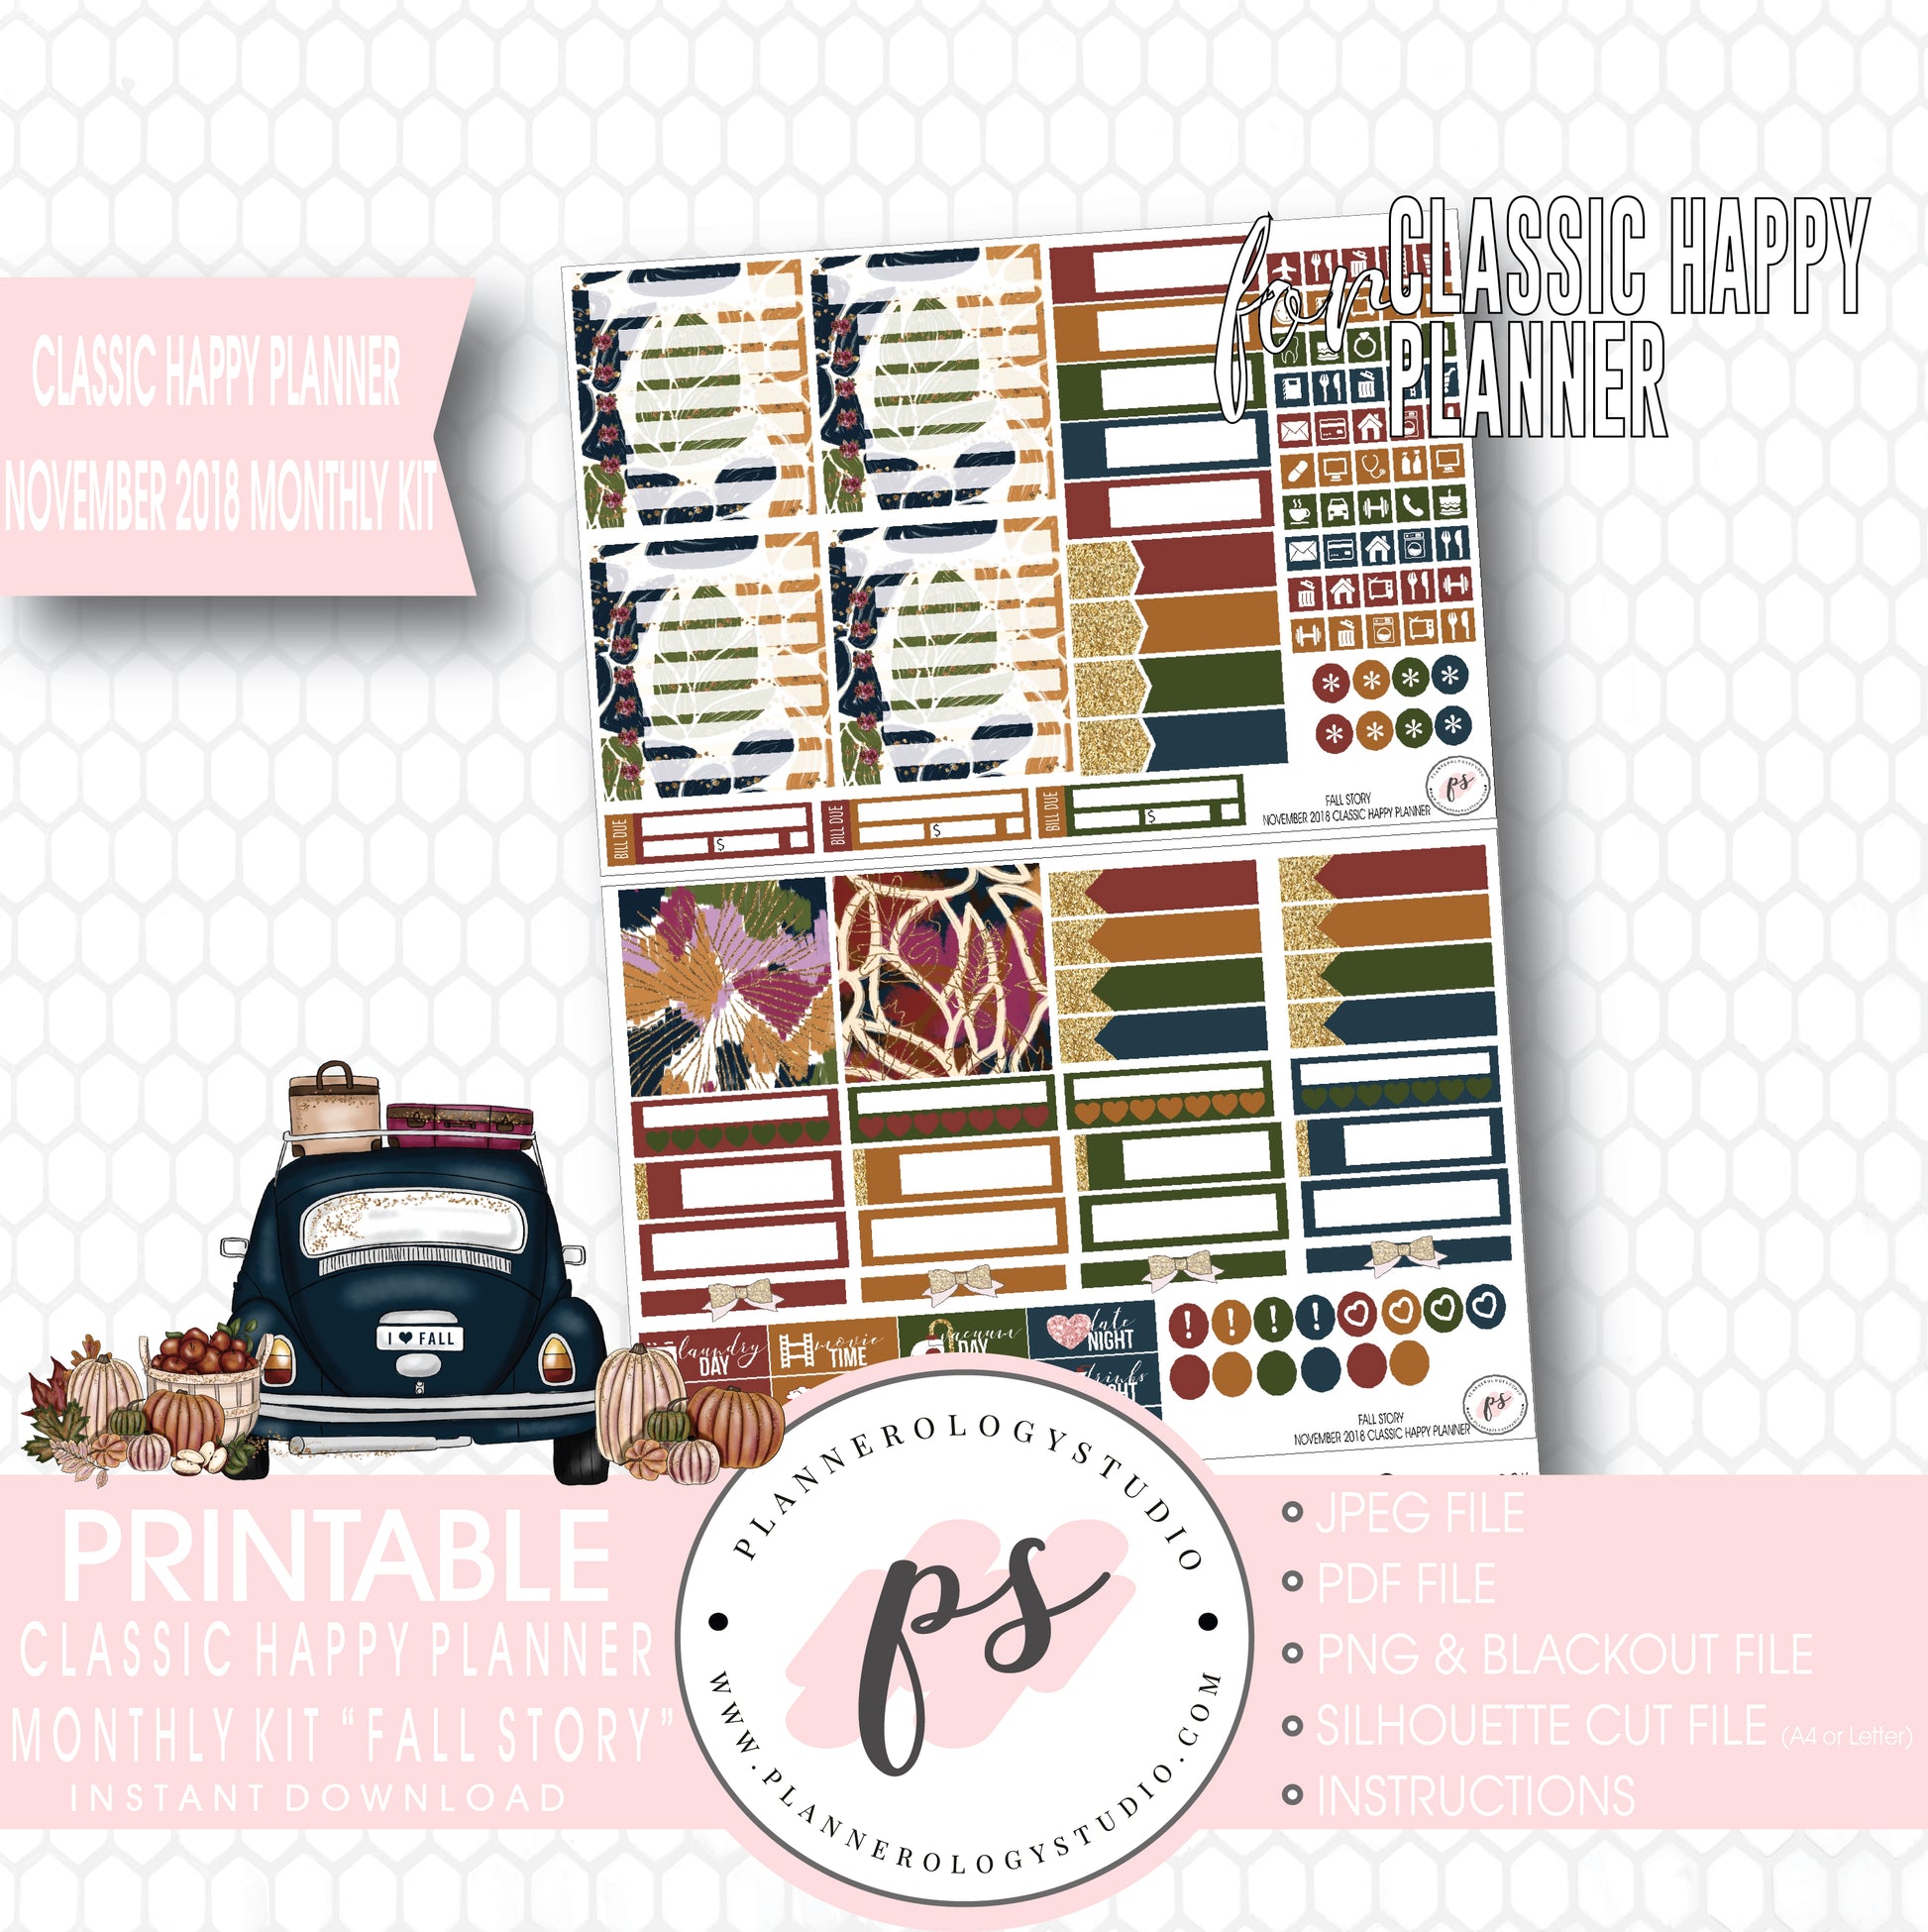 Fall Story November 2018 Monthly View Kit Digital Printable Planner Stickers (for use with Classic Happy Planner) - Plannerologystudio